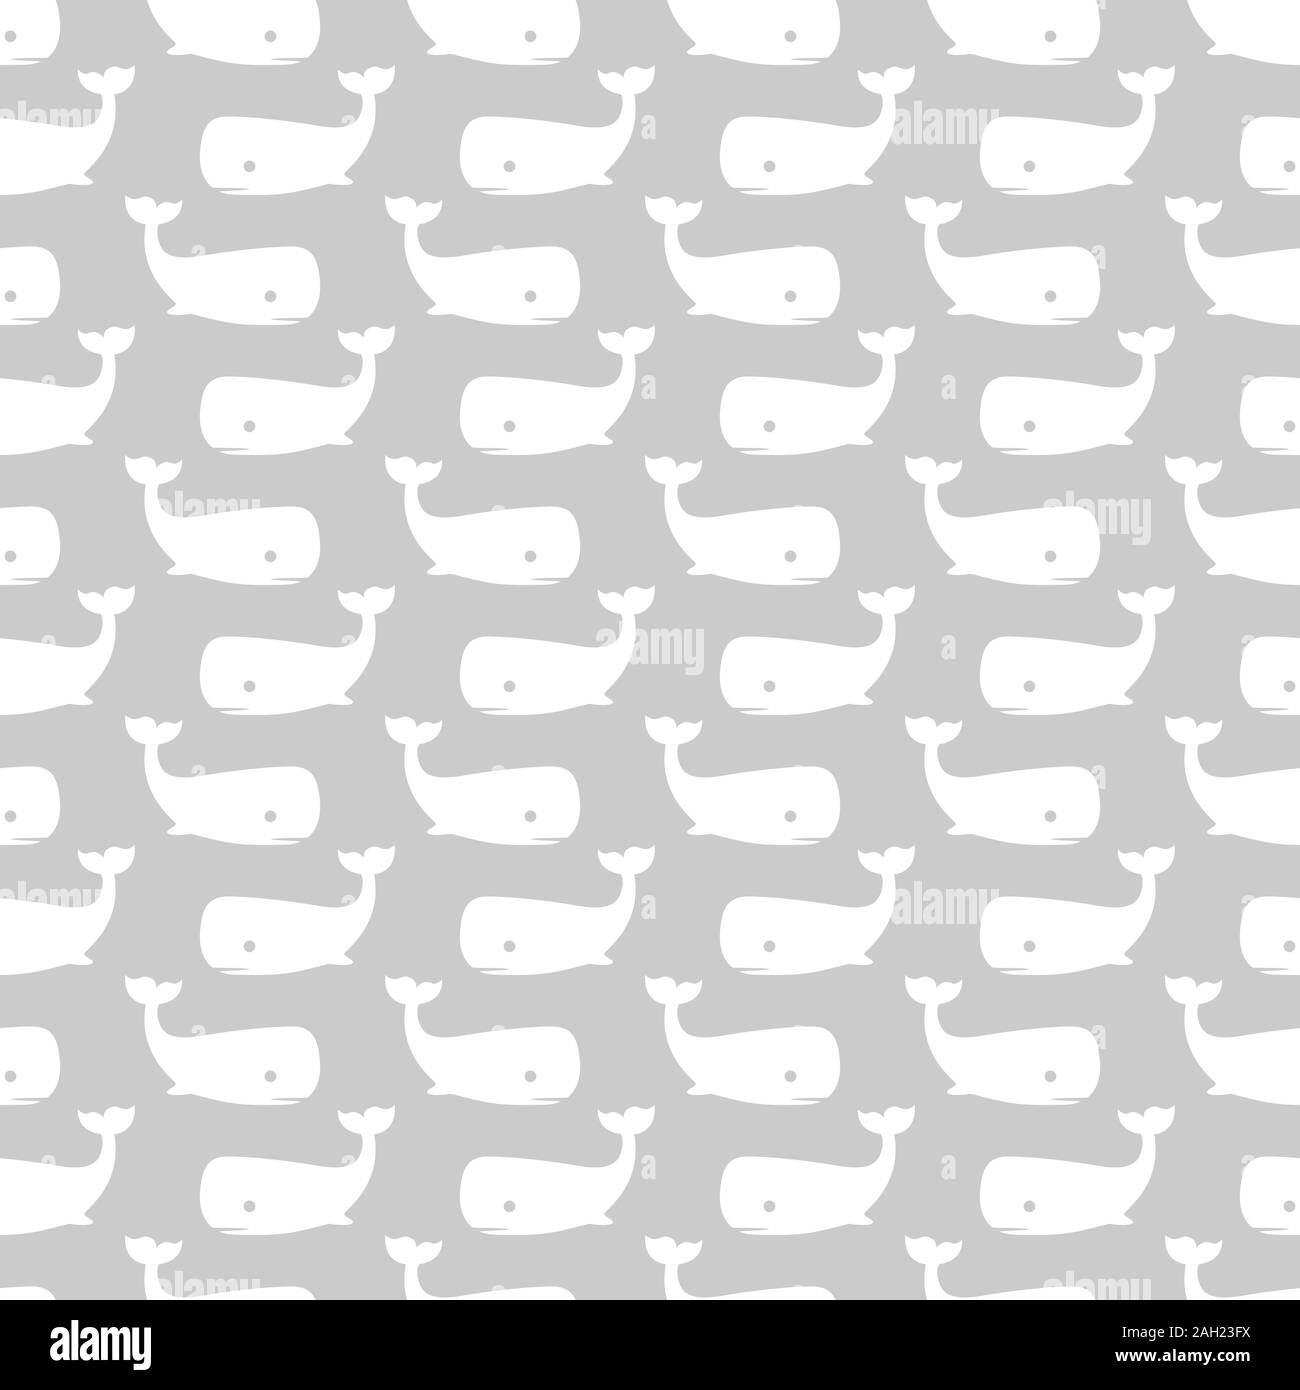 Simple whale pattern seamless repeat background Stock Photo